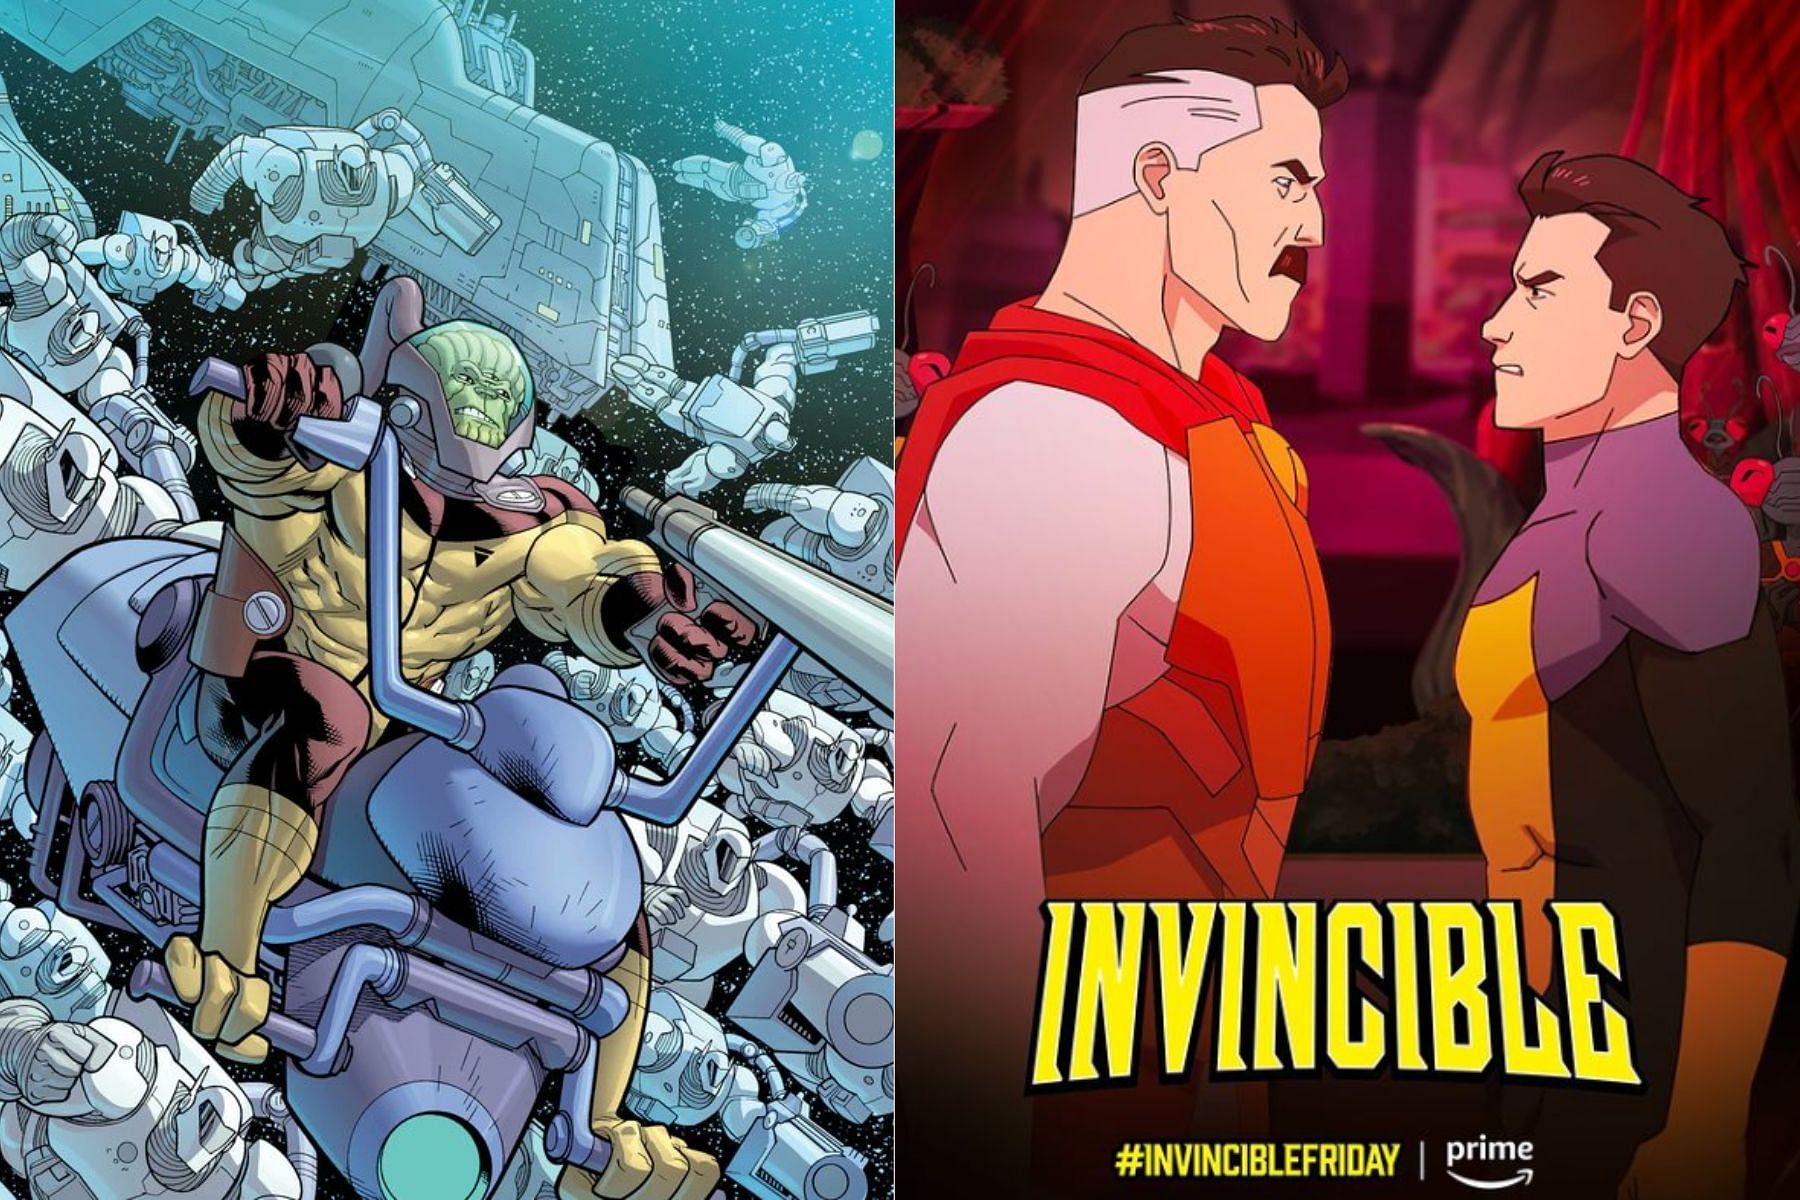 Spaceracer and Official poster of Invincible (Images via Left: Twitter@MrPenguin2002 and Right: Instagram @invincible.hq)